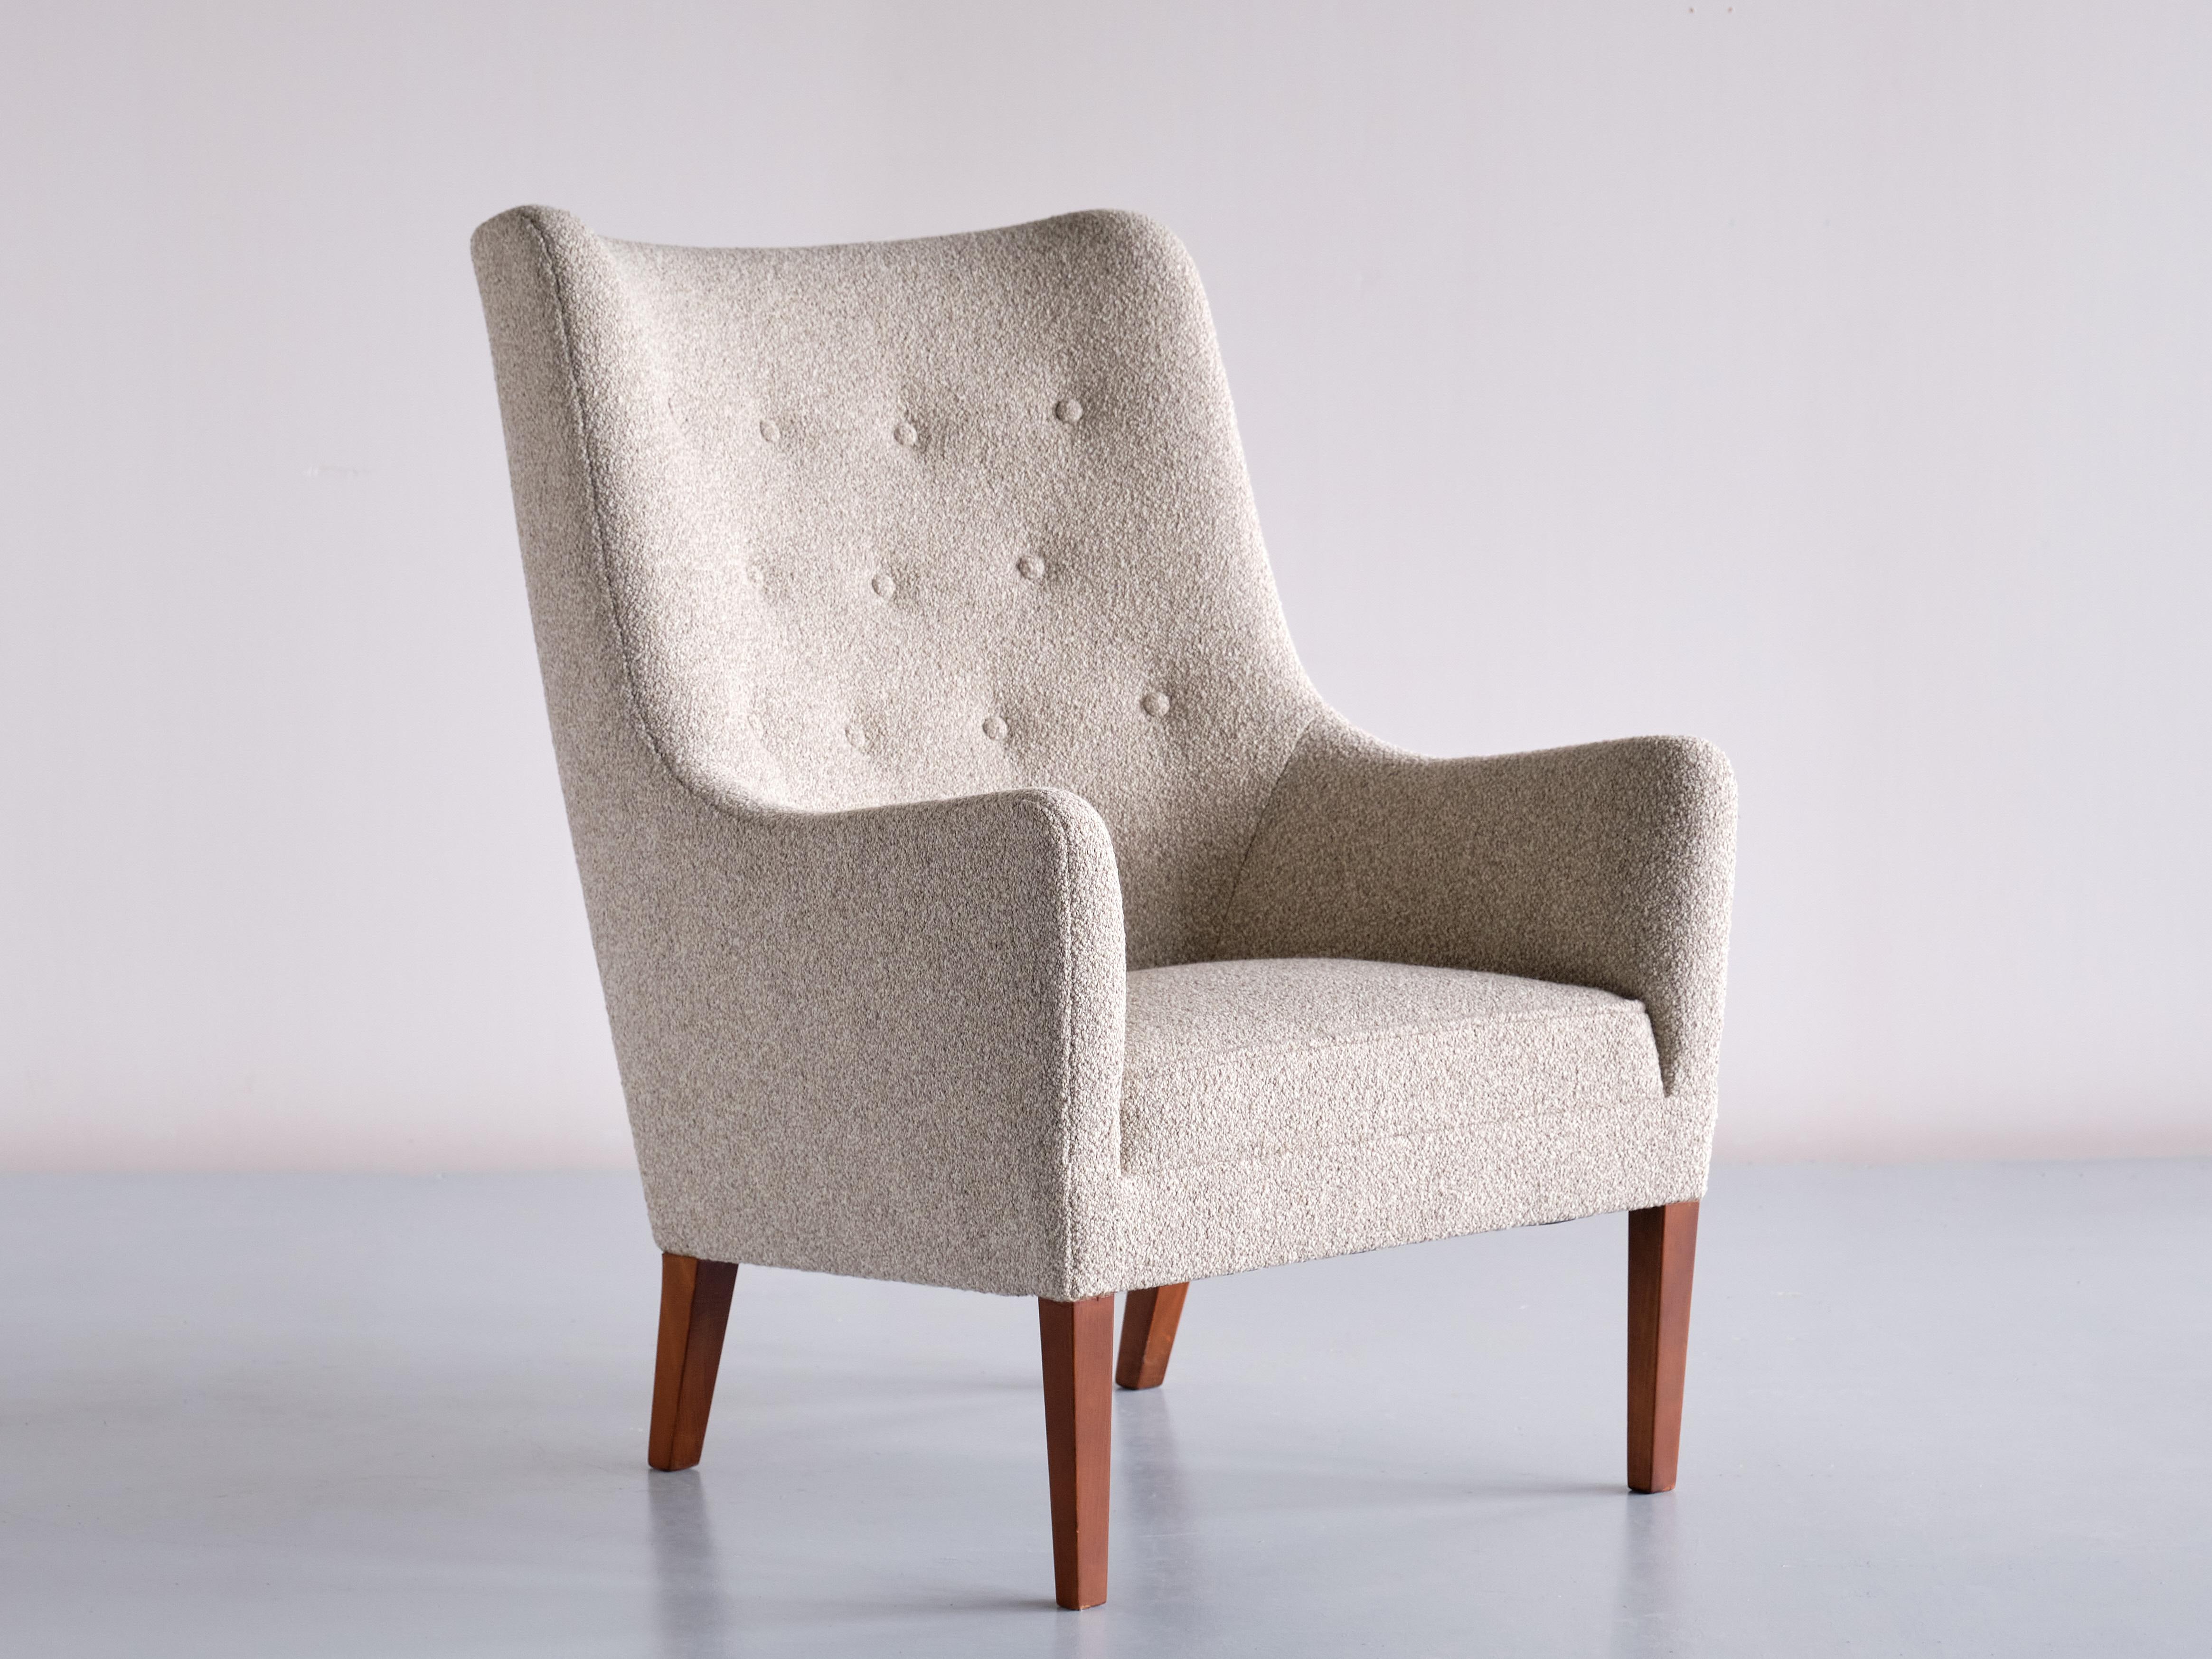 Mid-20th Century Pair of Jacob Kjær High Back Armchairs in Bouclé and Mahogany, Denmark, 1940s For Sale